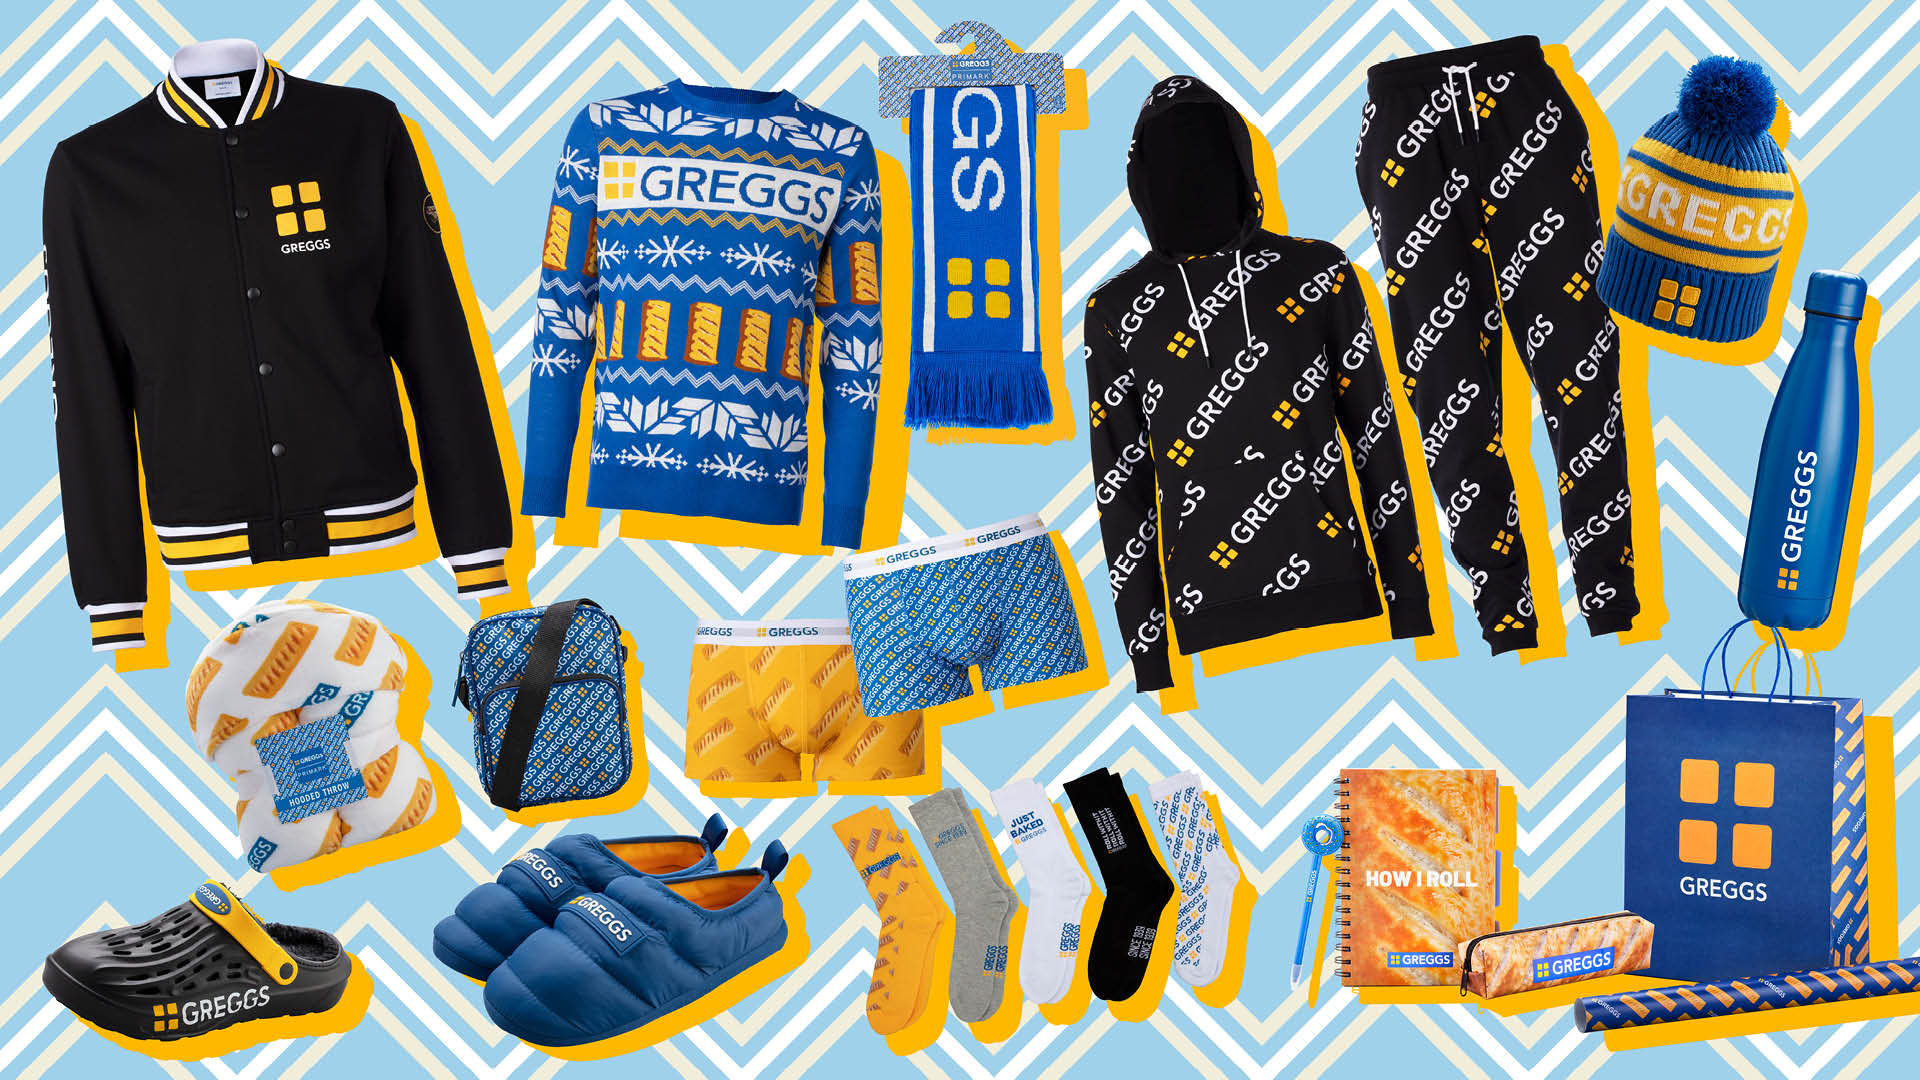 Take a look at the full Primark and Greggs clothing collection